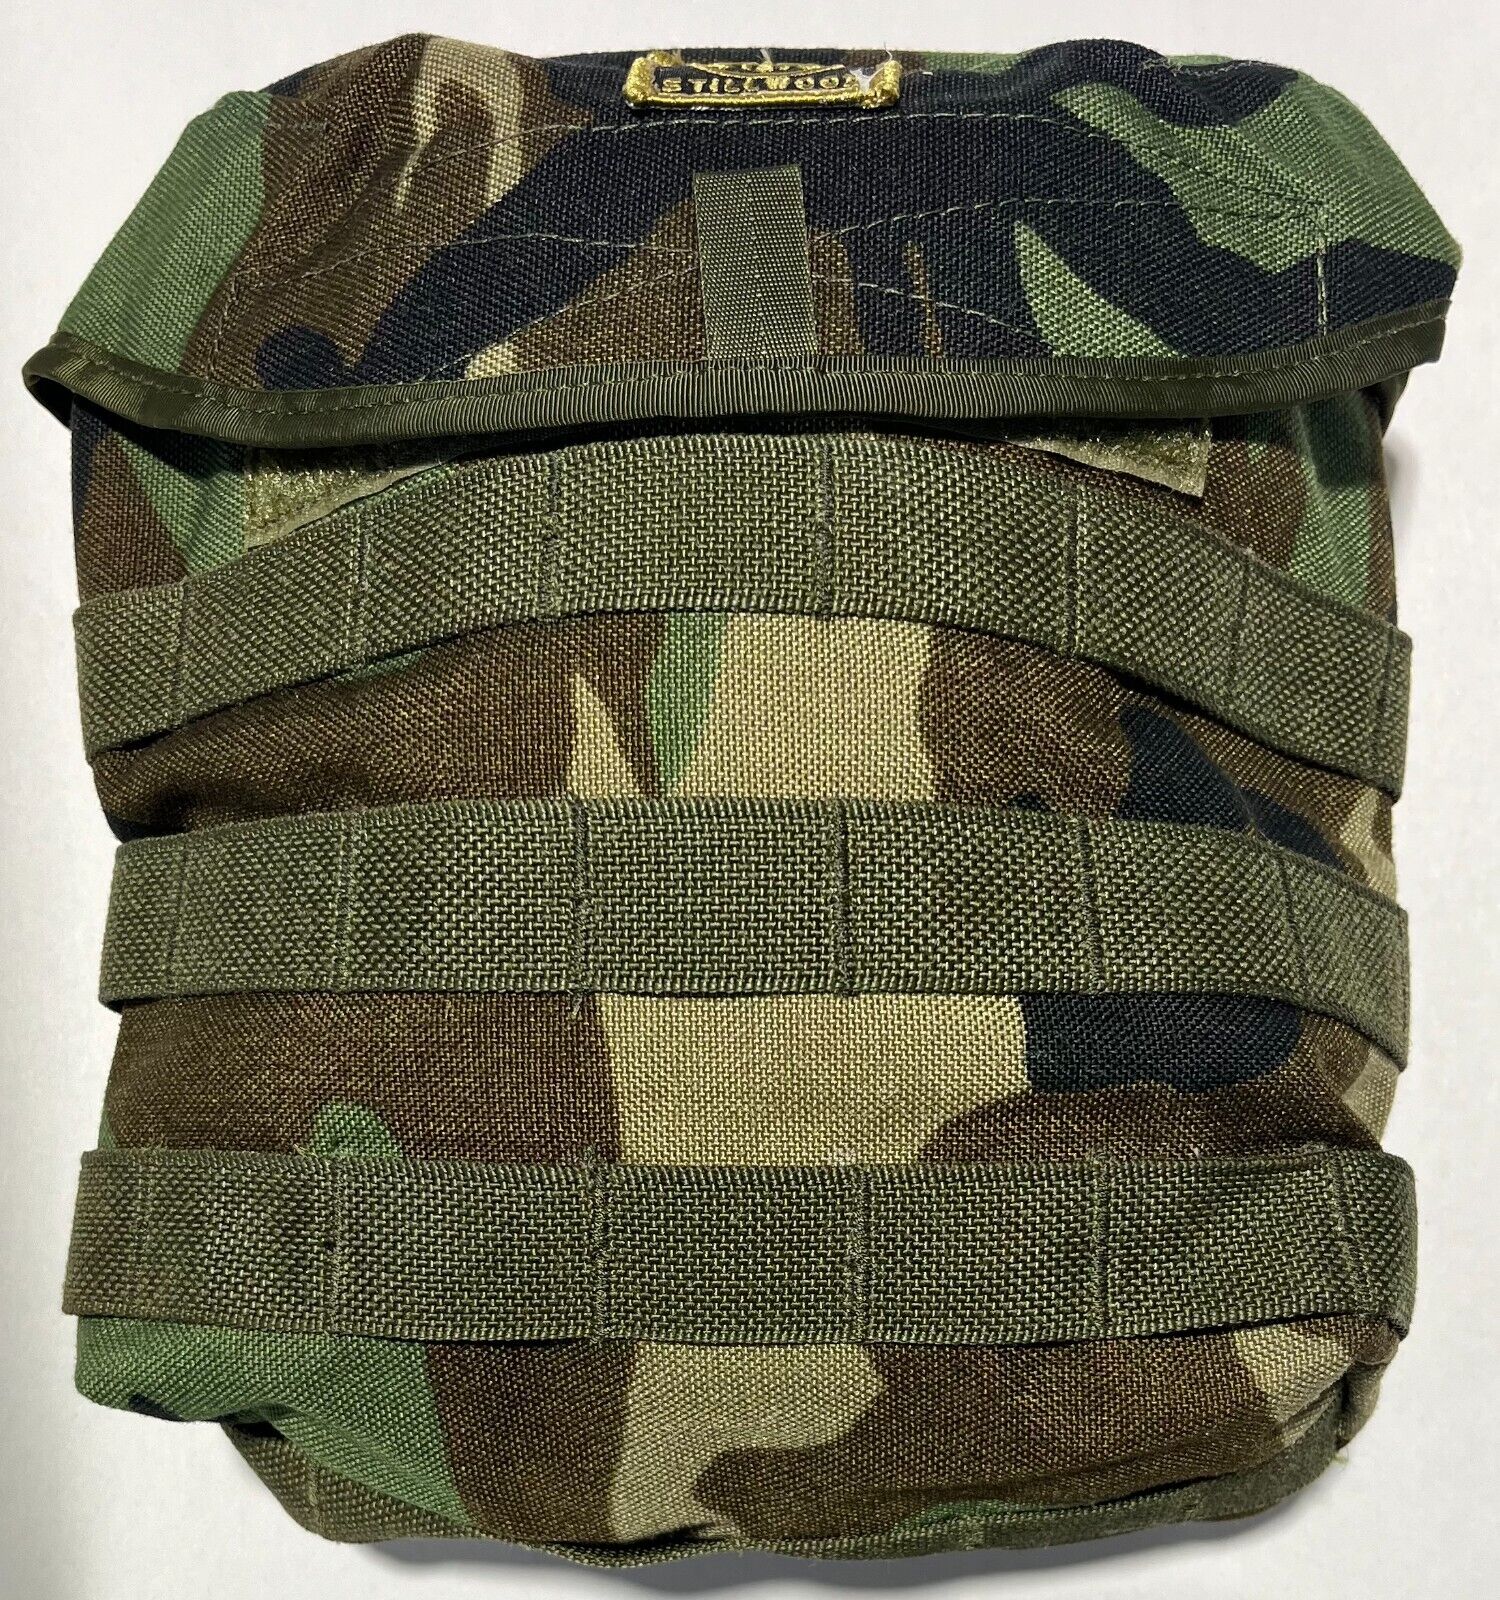 MAG DUMP POUCH Multi Purpose MOLLE MALICE (3) Woodland Camouflage USA